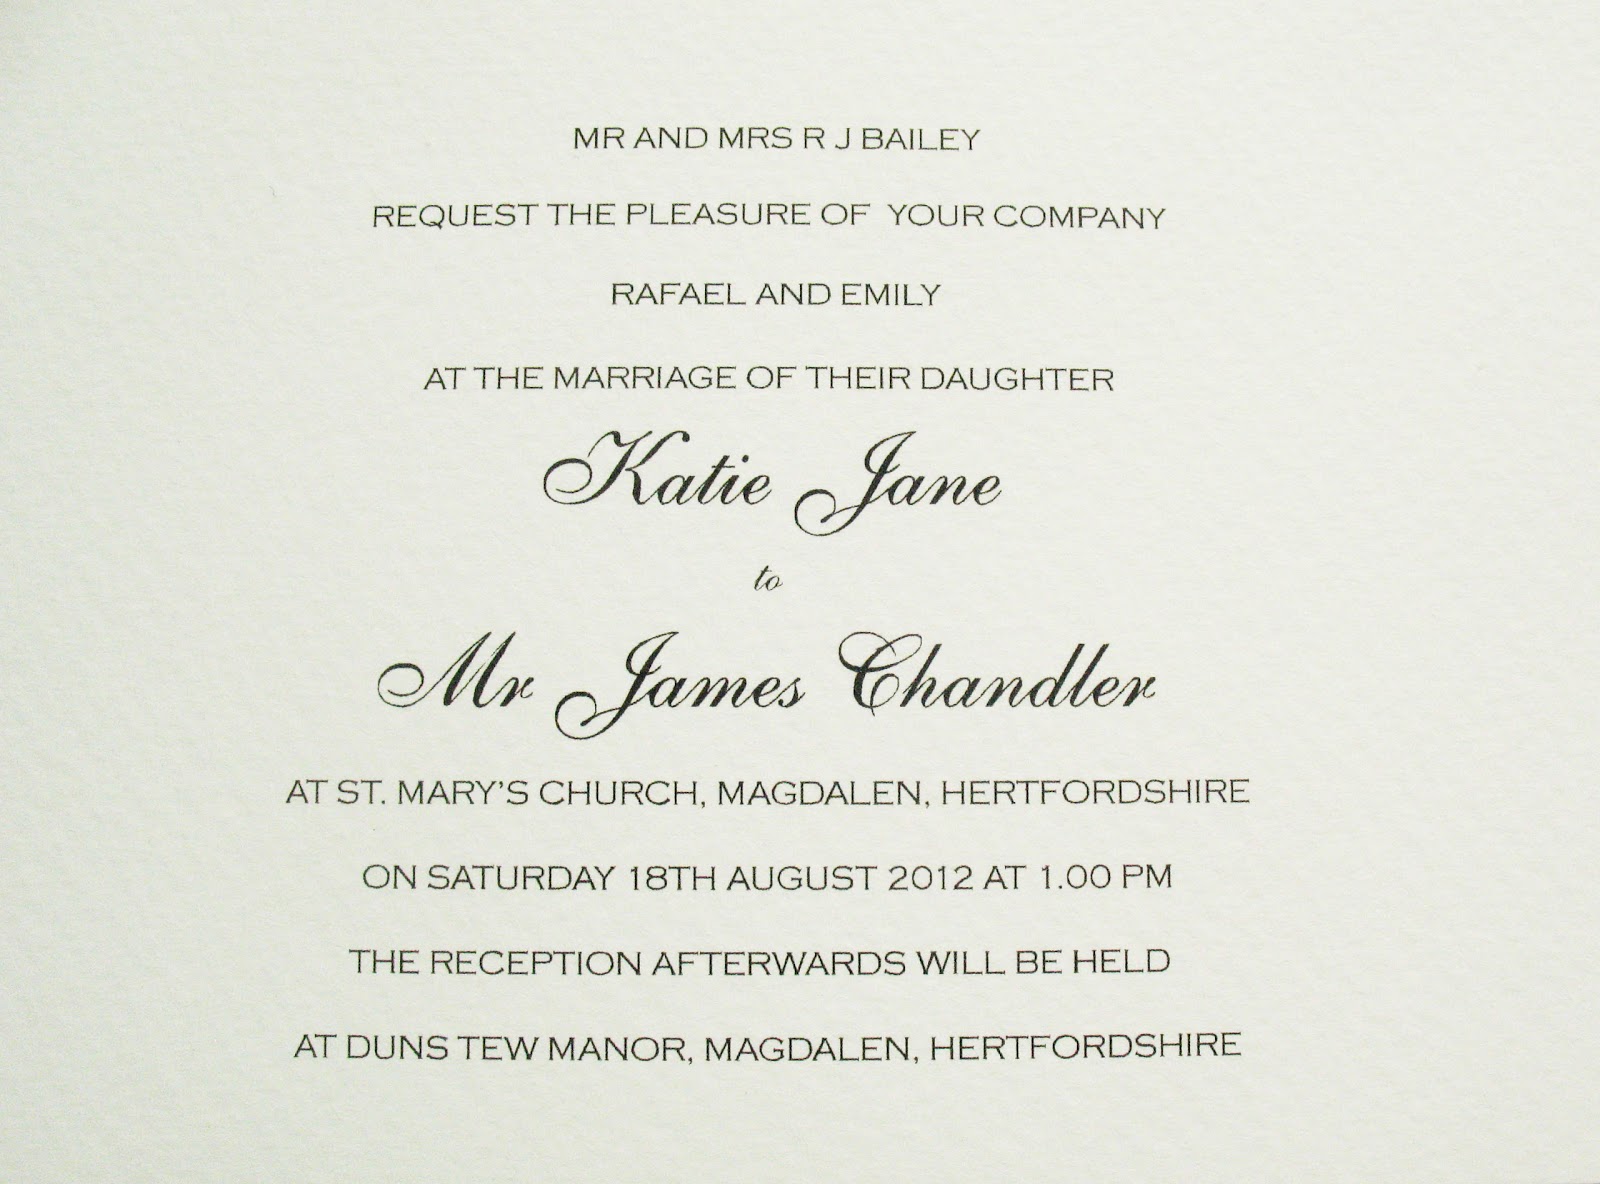 Inspiration for weddings, invitations and stationery: typography for ...